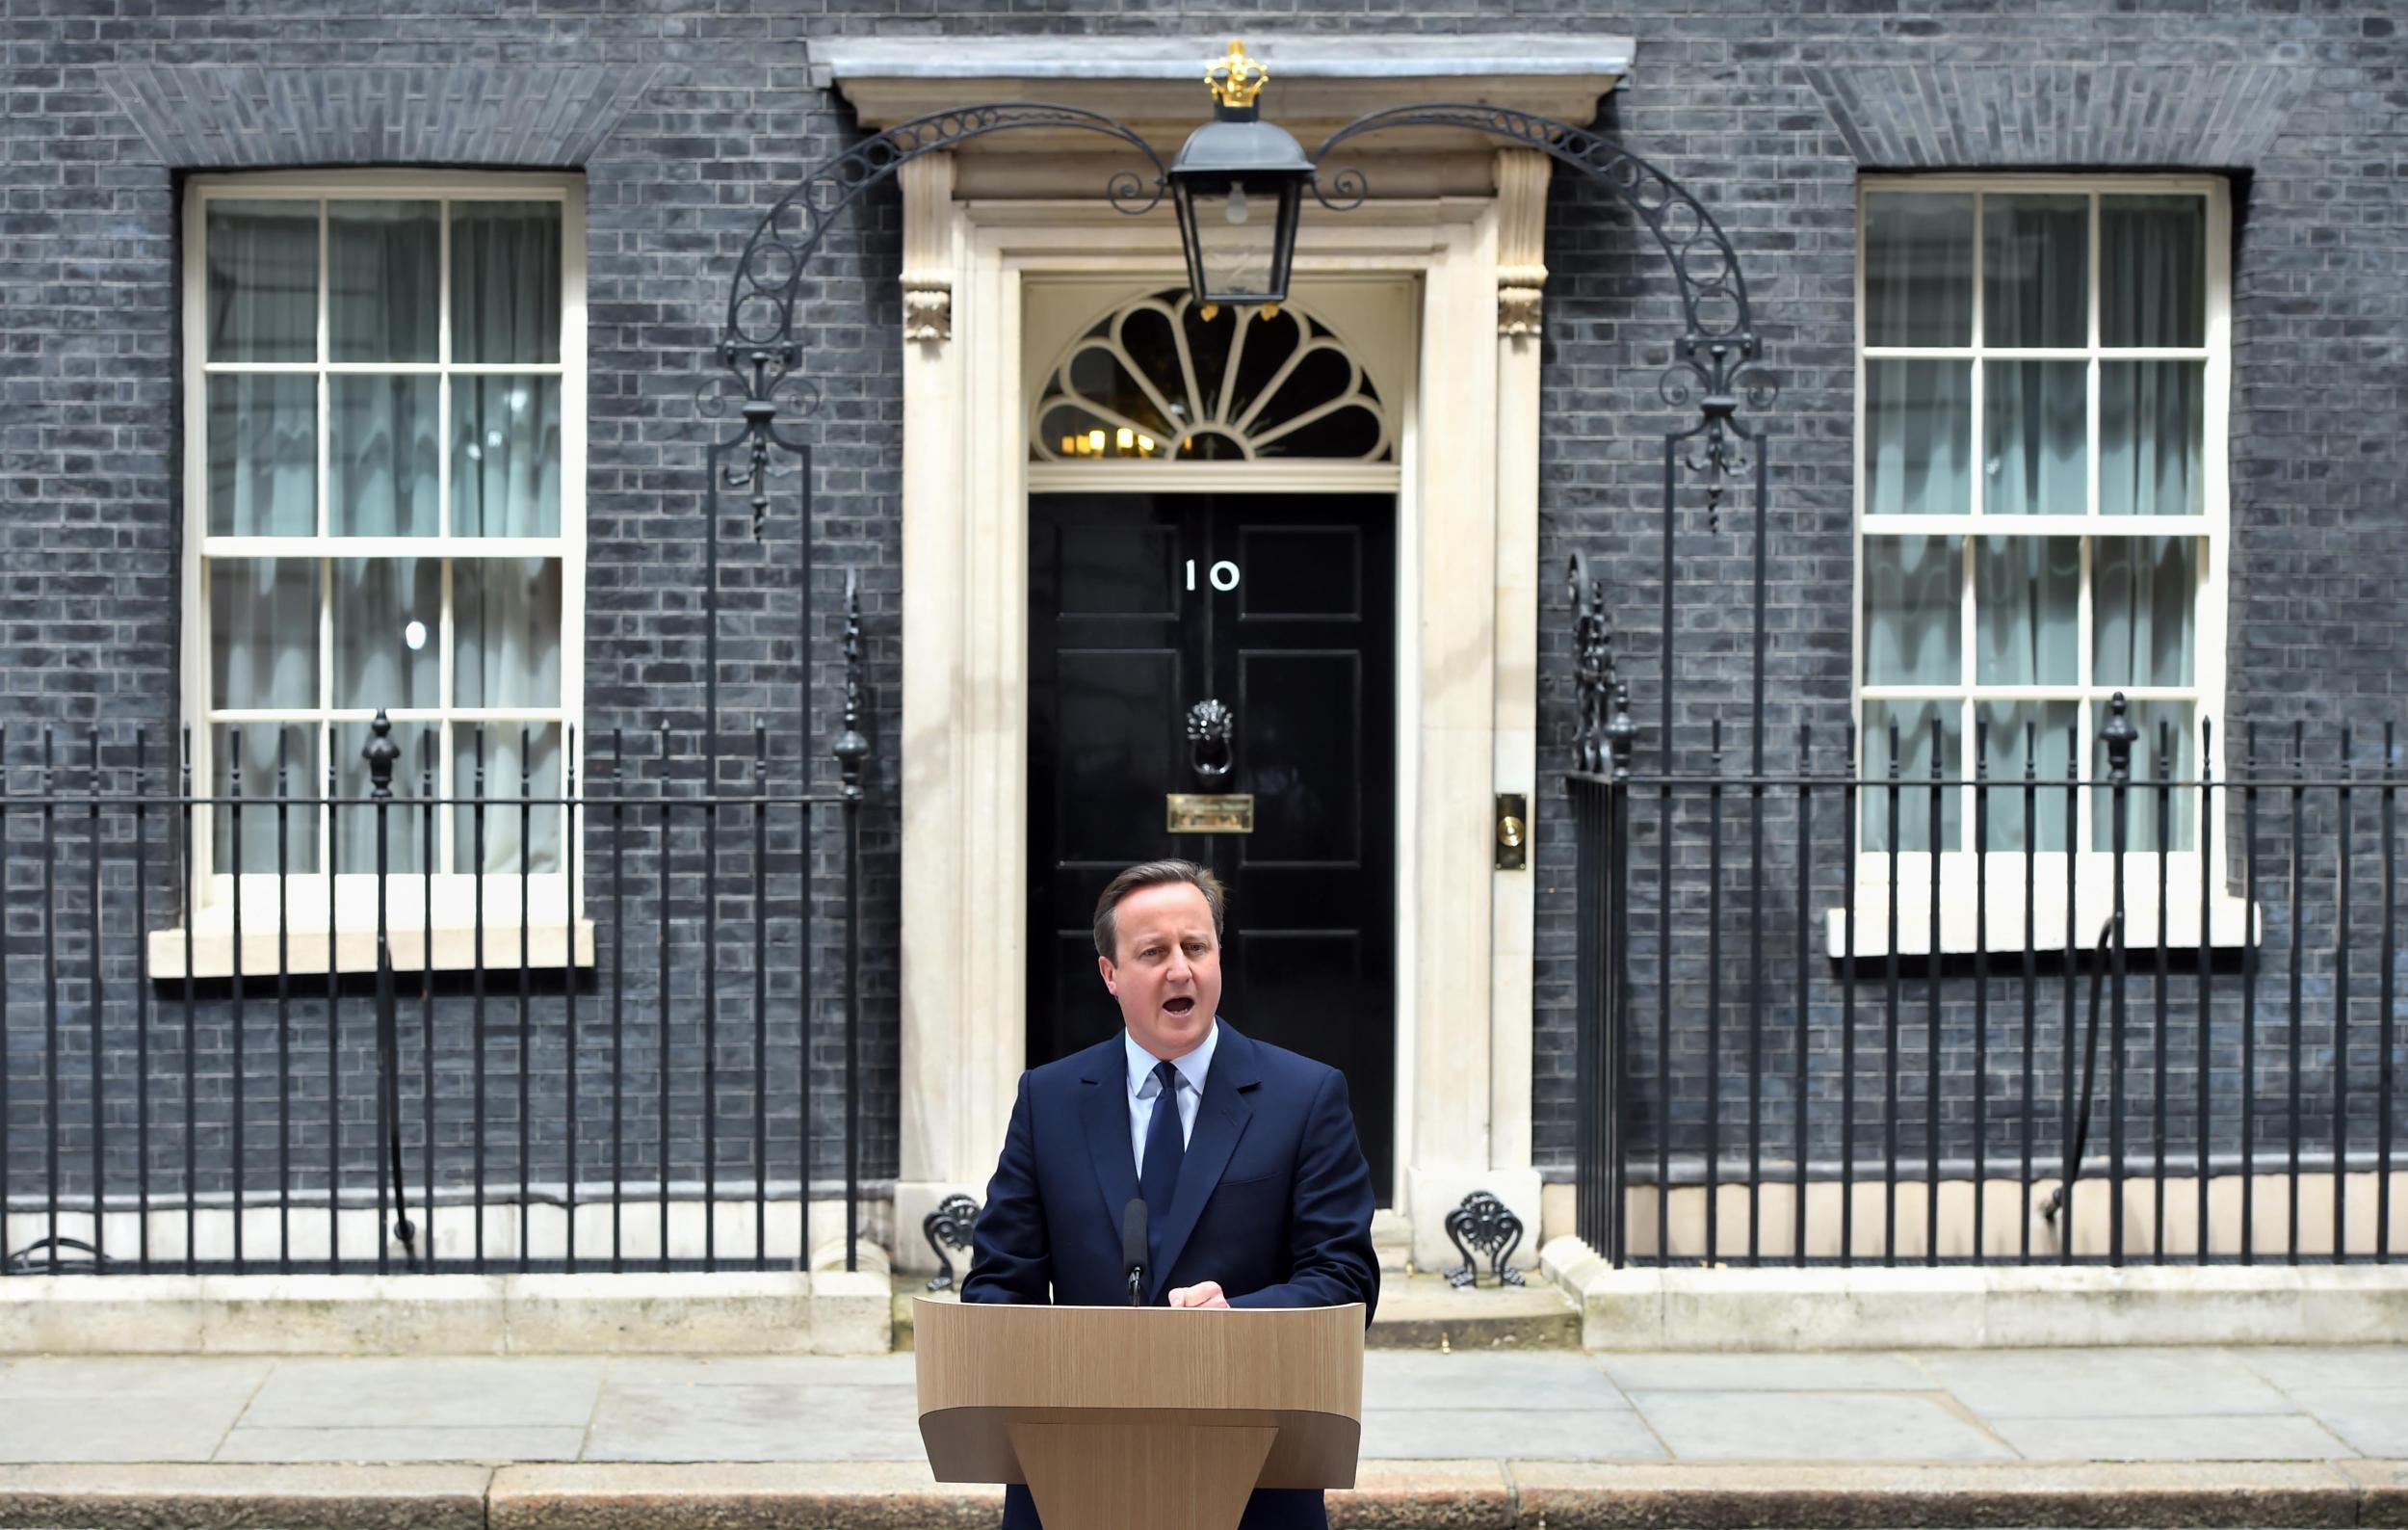 David Cameron will address the public once the result is confirmed. But will he be triumphant? Or resigned to defeat?